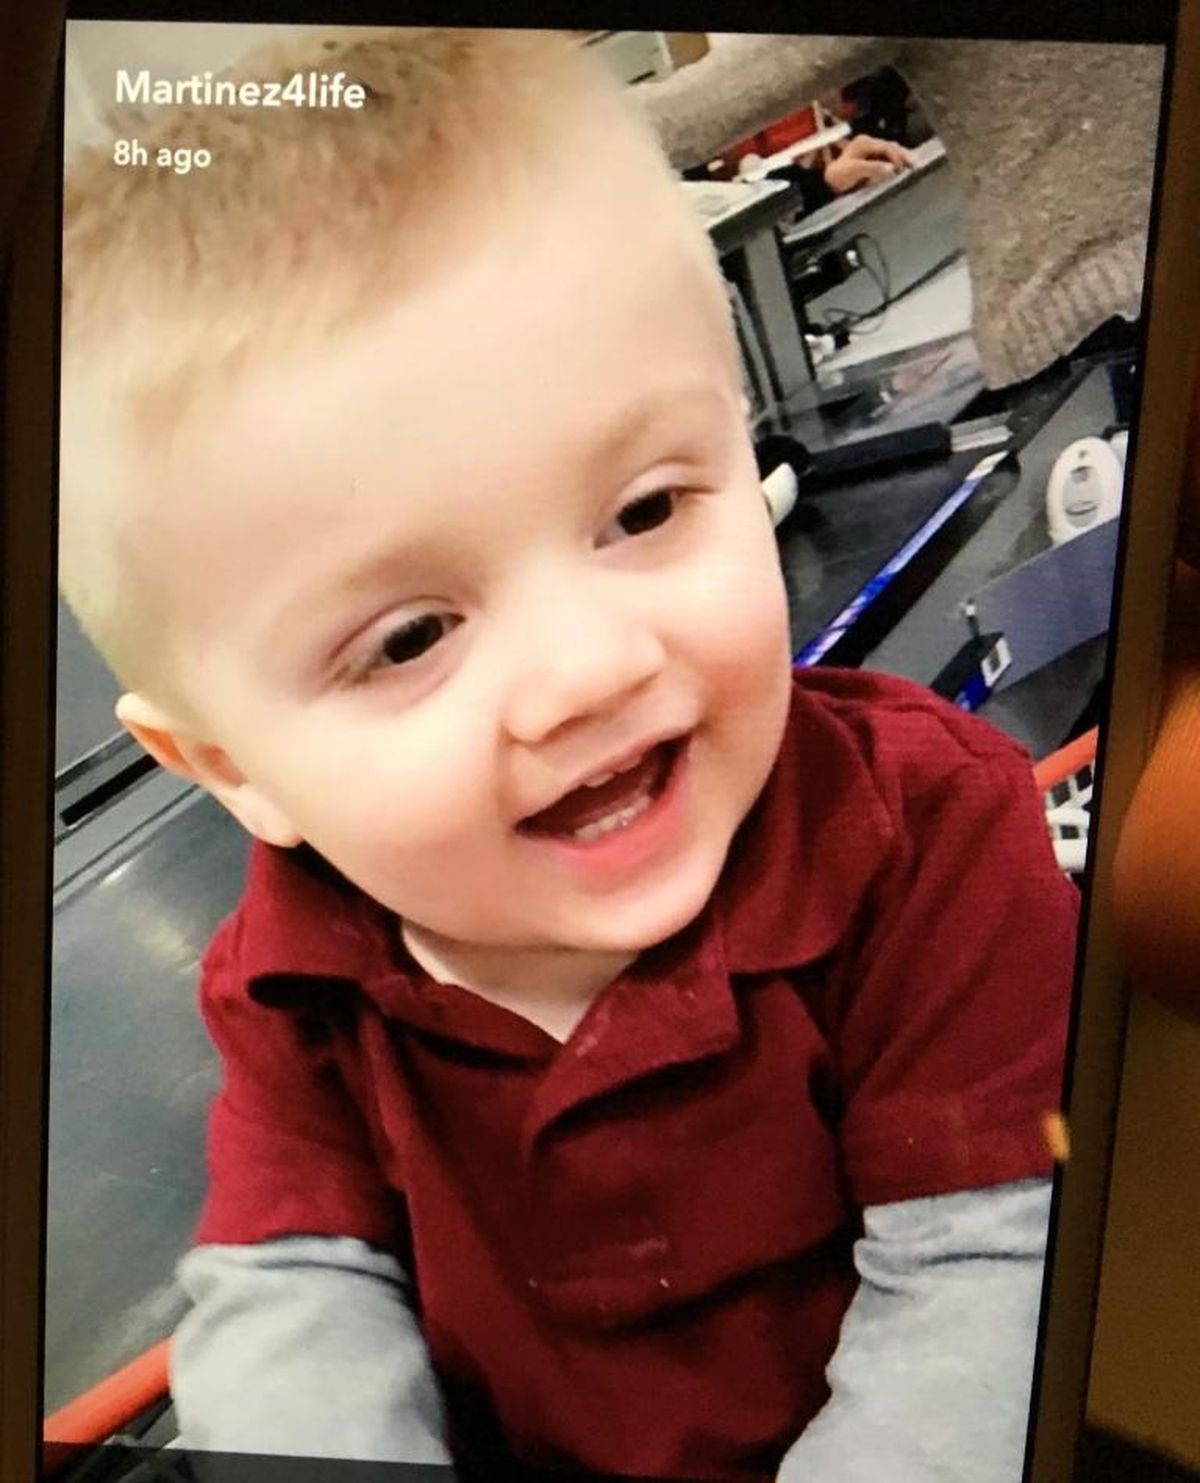 17-month-old Leonnel Barajas was kidnapped late Monday night and missing for several hours before Yakima police officers found the child with his mother early Tuesday morning. (Courtesy Yakima Police Department)